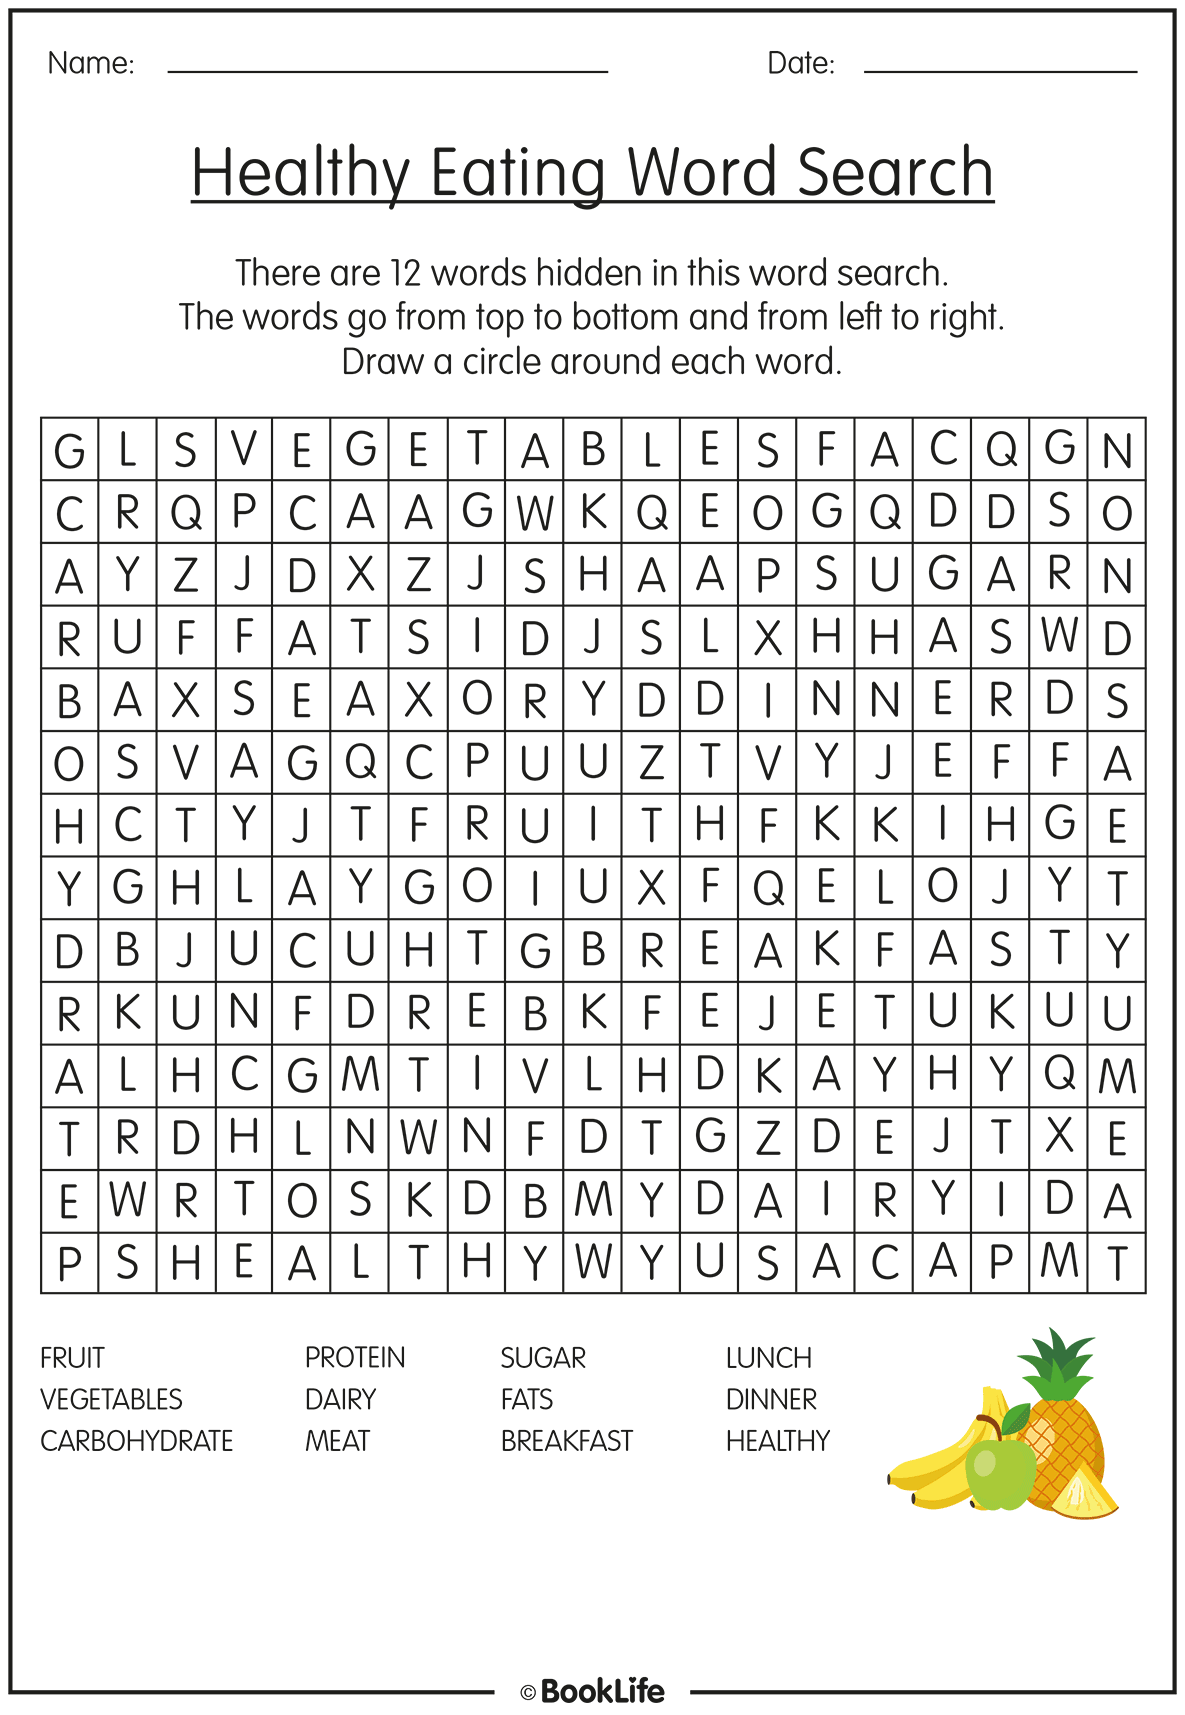 Healthy Eating Word Search by BookLife